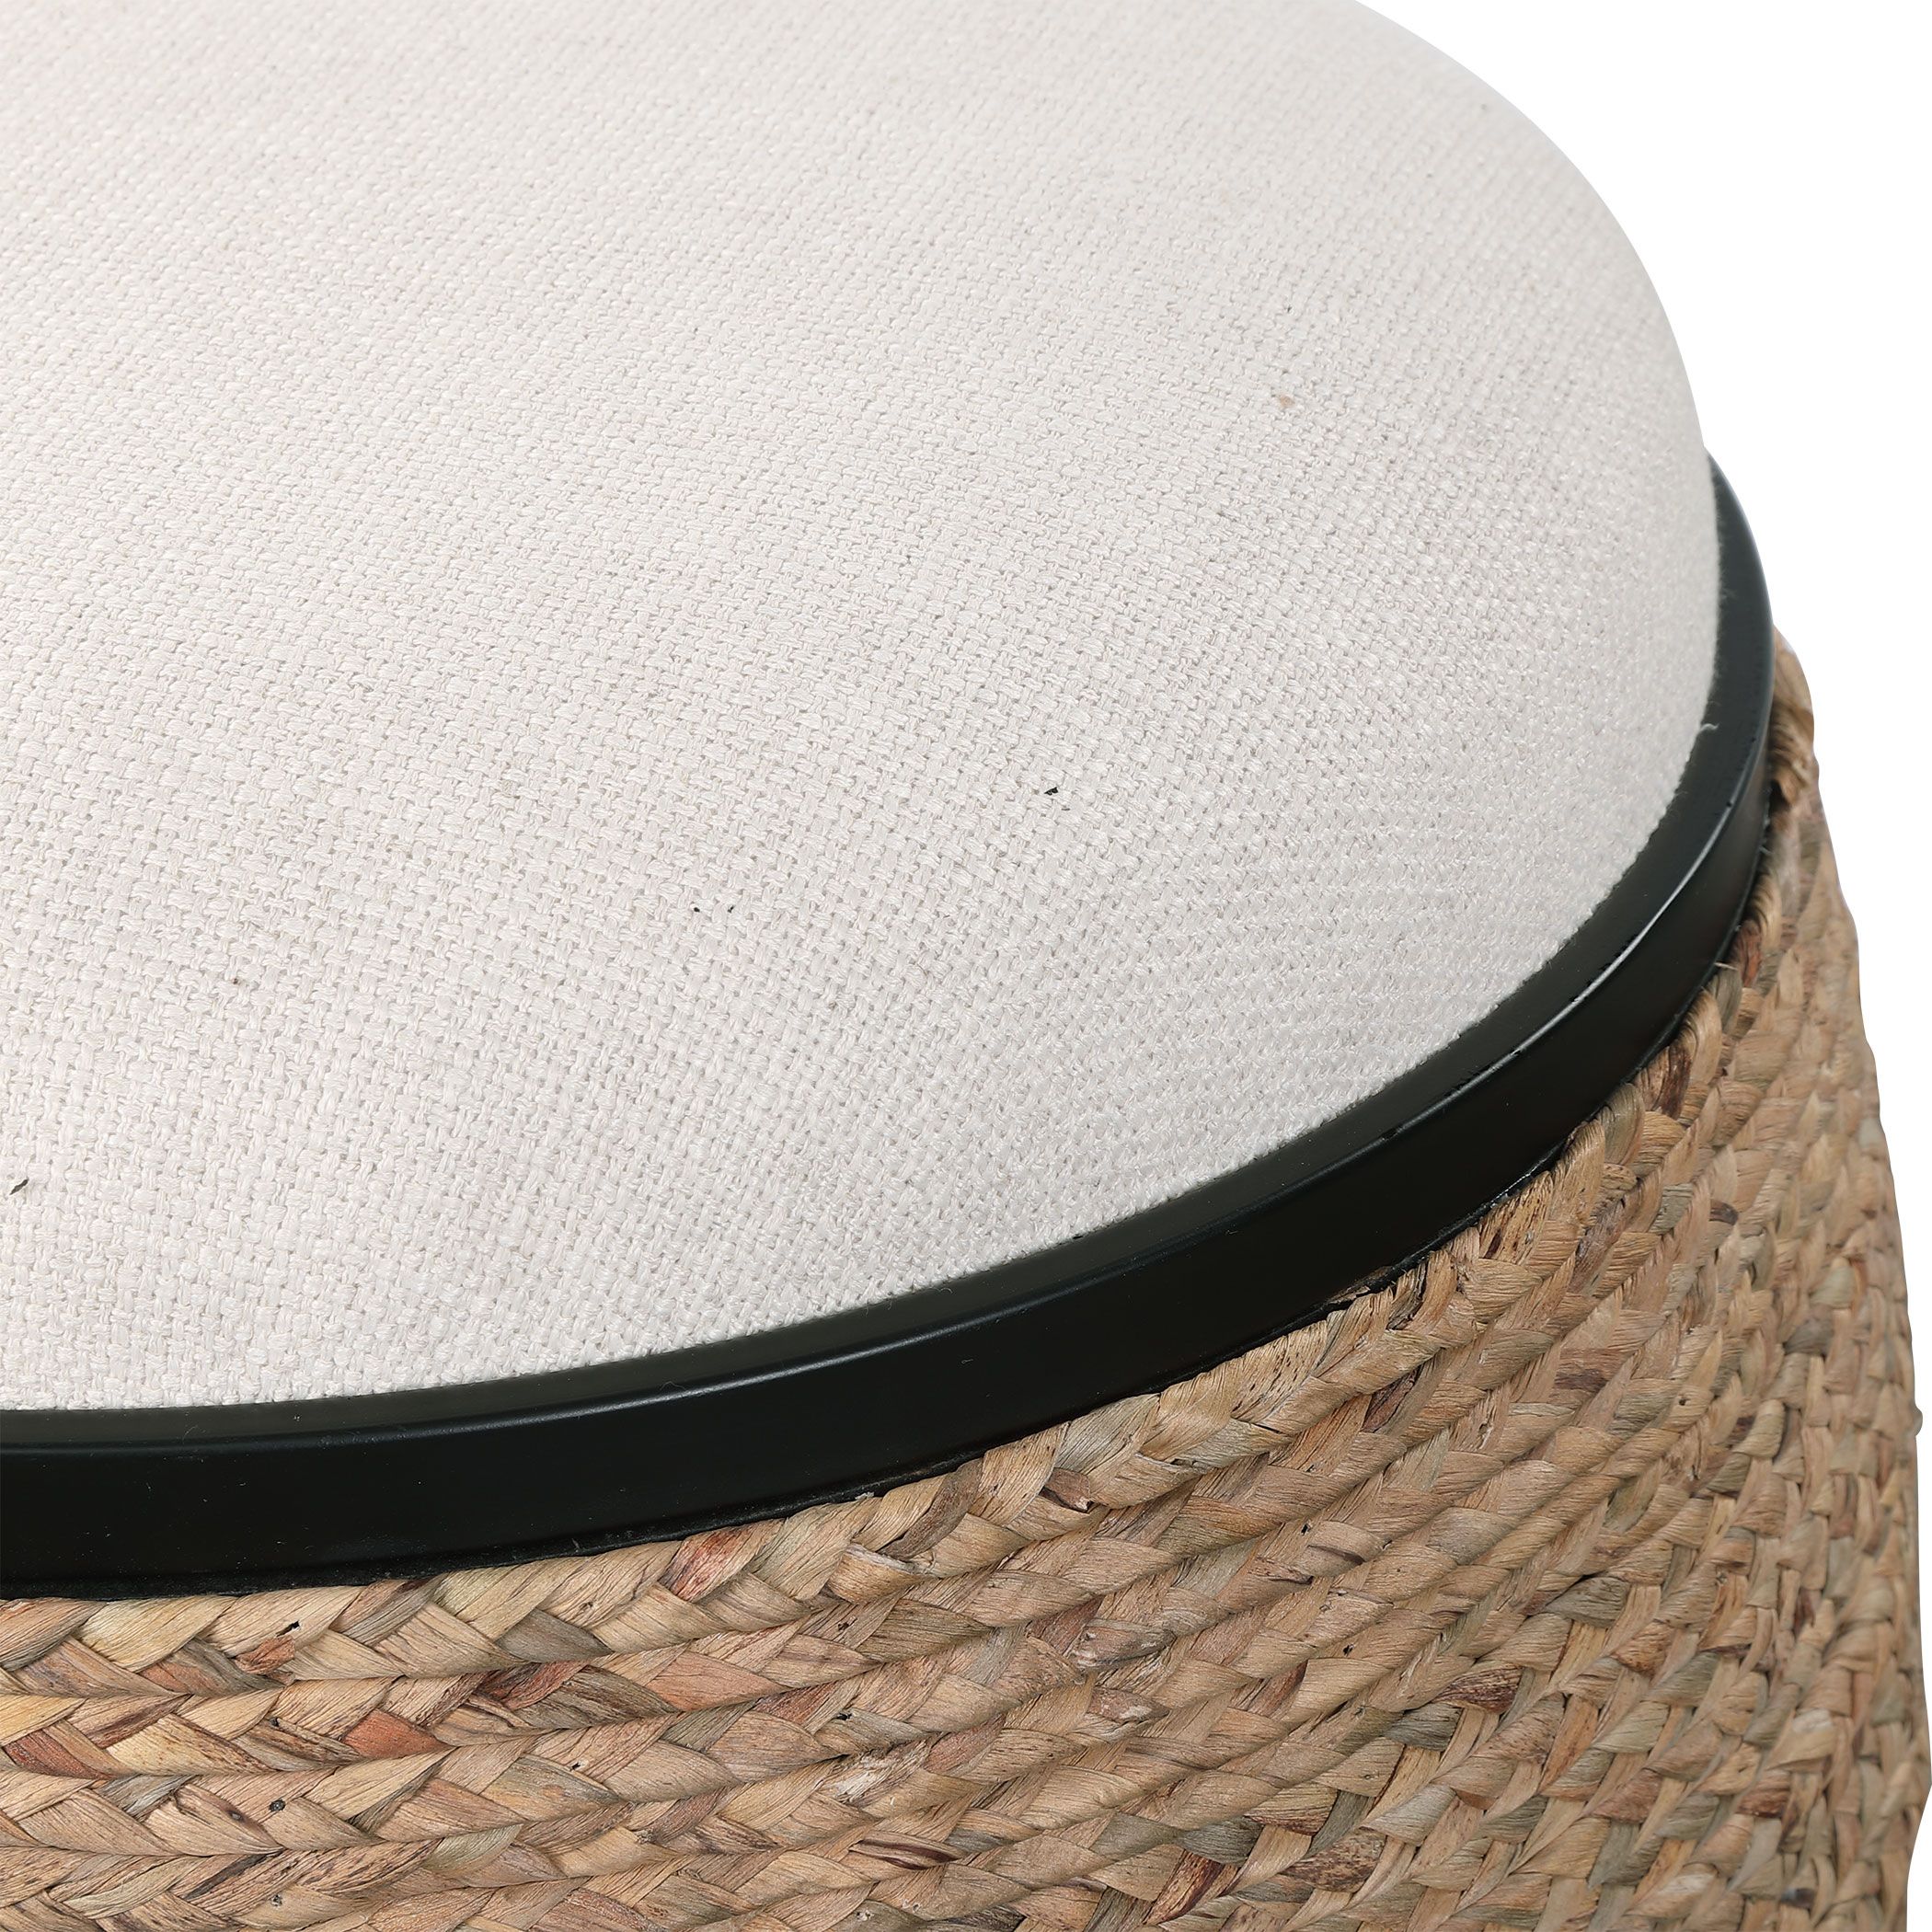 Island Straw Accent Stool | Painted Fox Home Regarding Natural Beige And White Short Cylinder Pouf Ottomans (View 15 of 20)